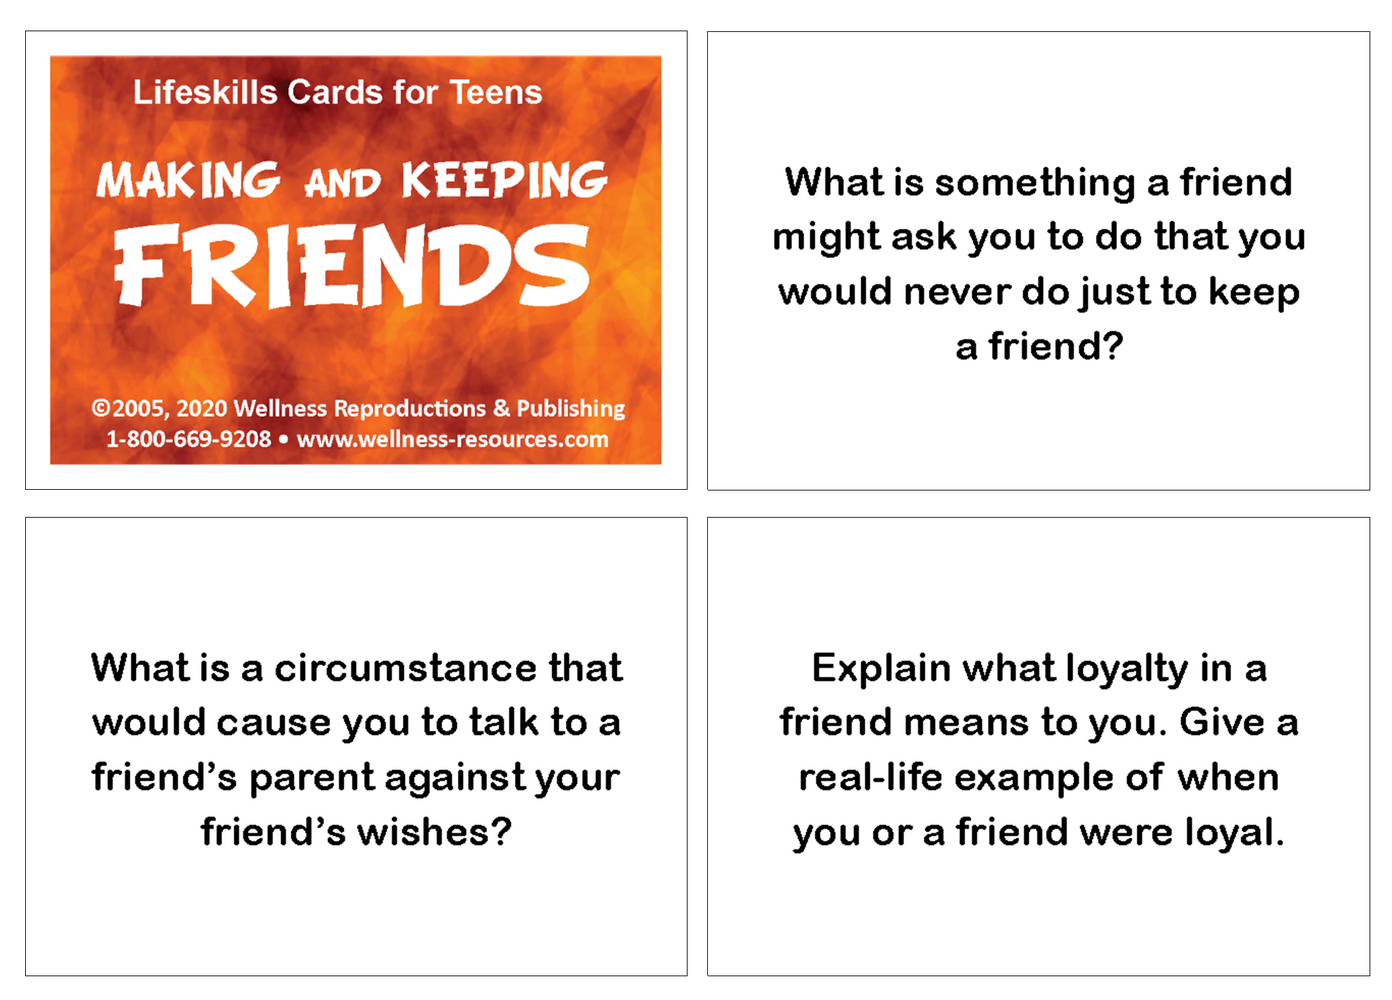 Lifeskills Cards for Teens: Making and Keeping Friends